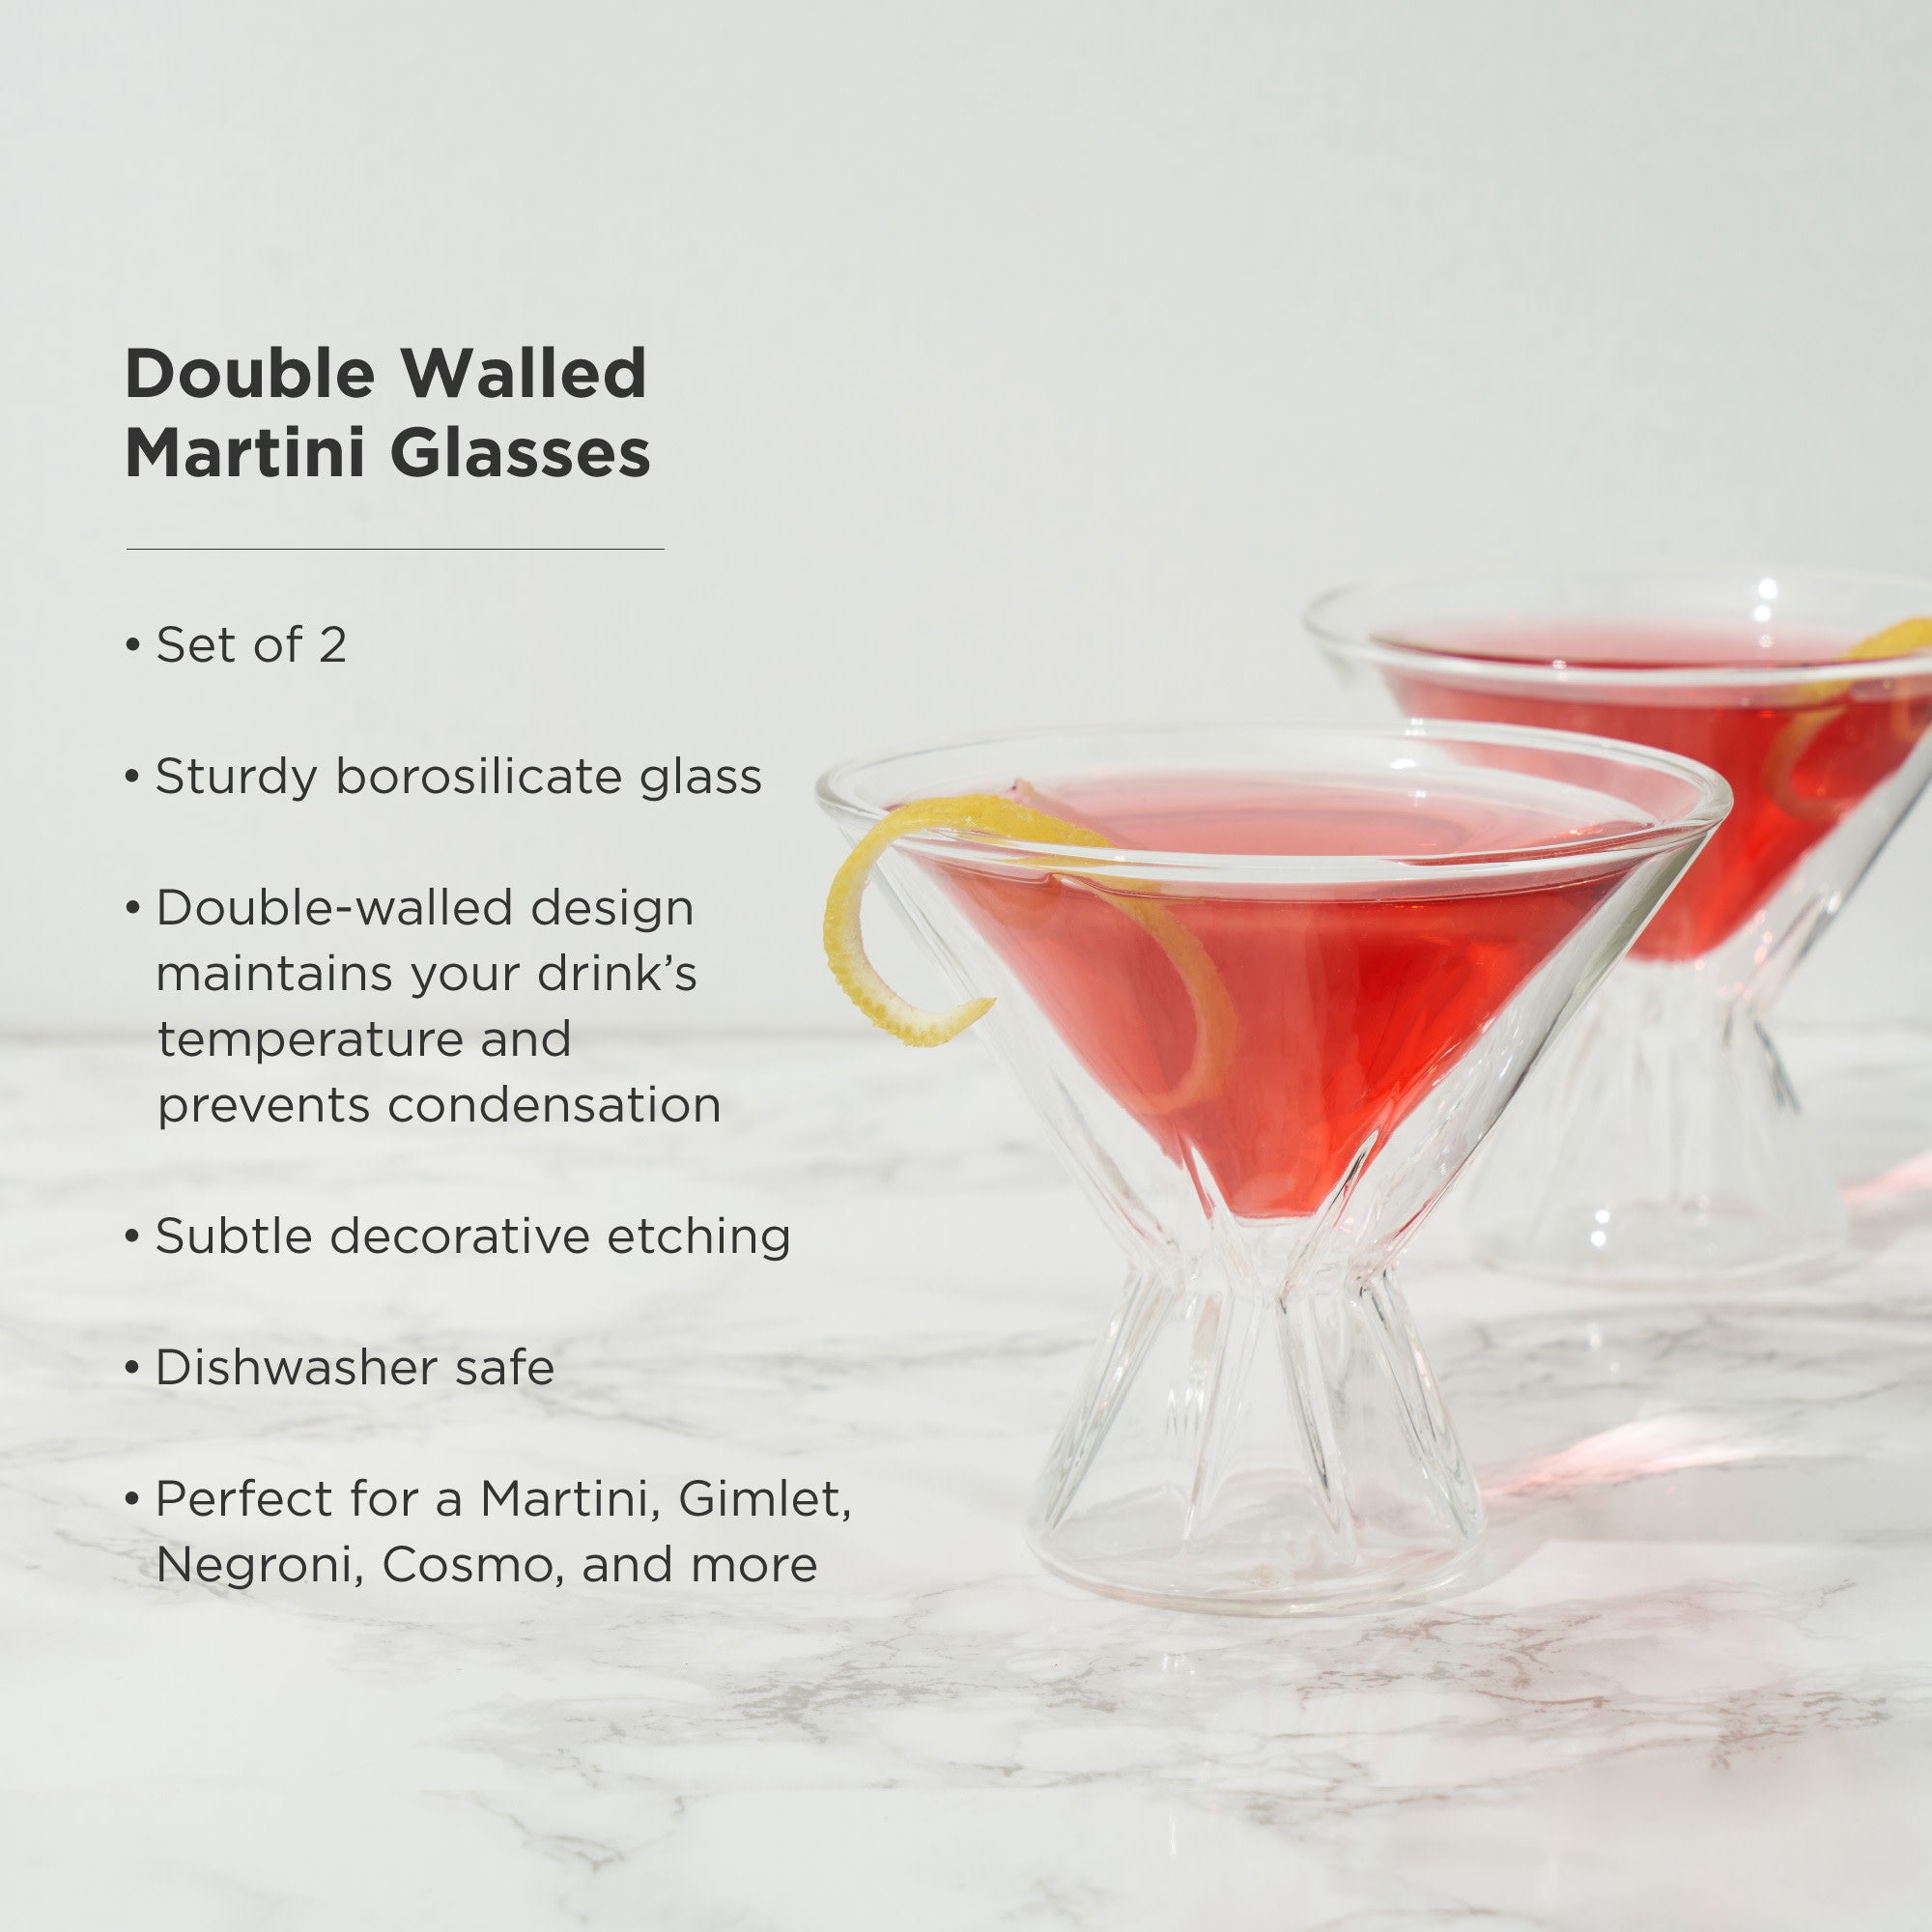 Ysell Insulated Martini Glasses,Set of 2,10 oz,Double Walled Cocktail  Glasses,Lead-Free Glass Cups Great for Cold or Hot Drinks